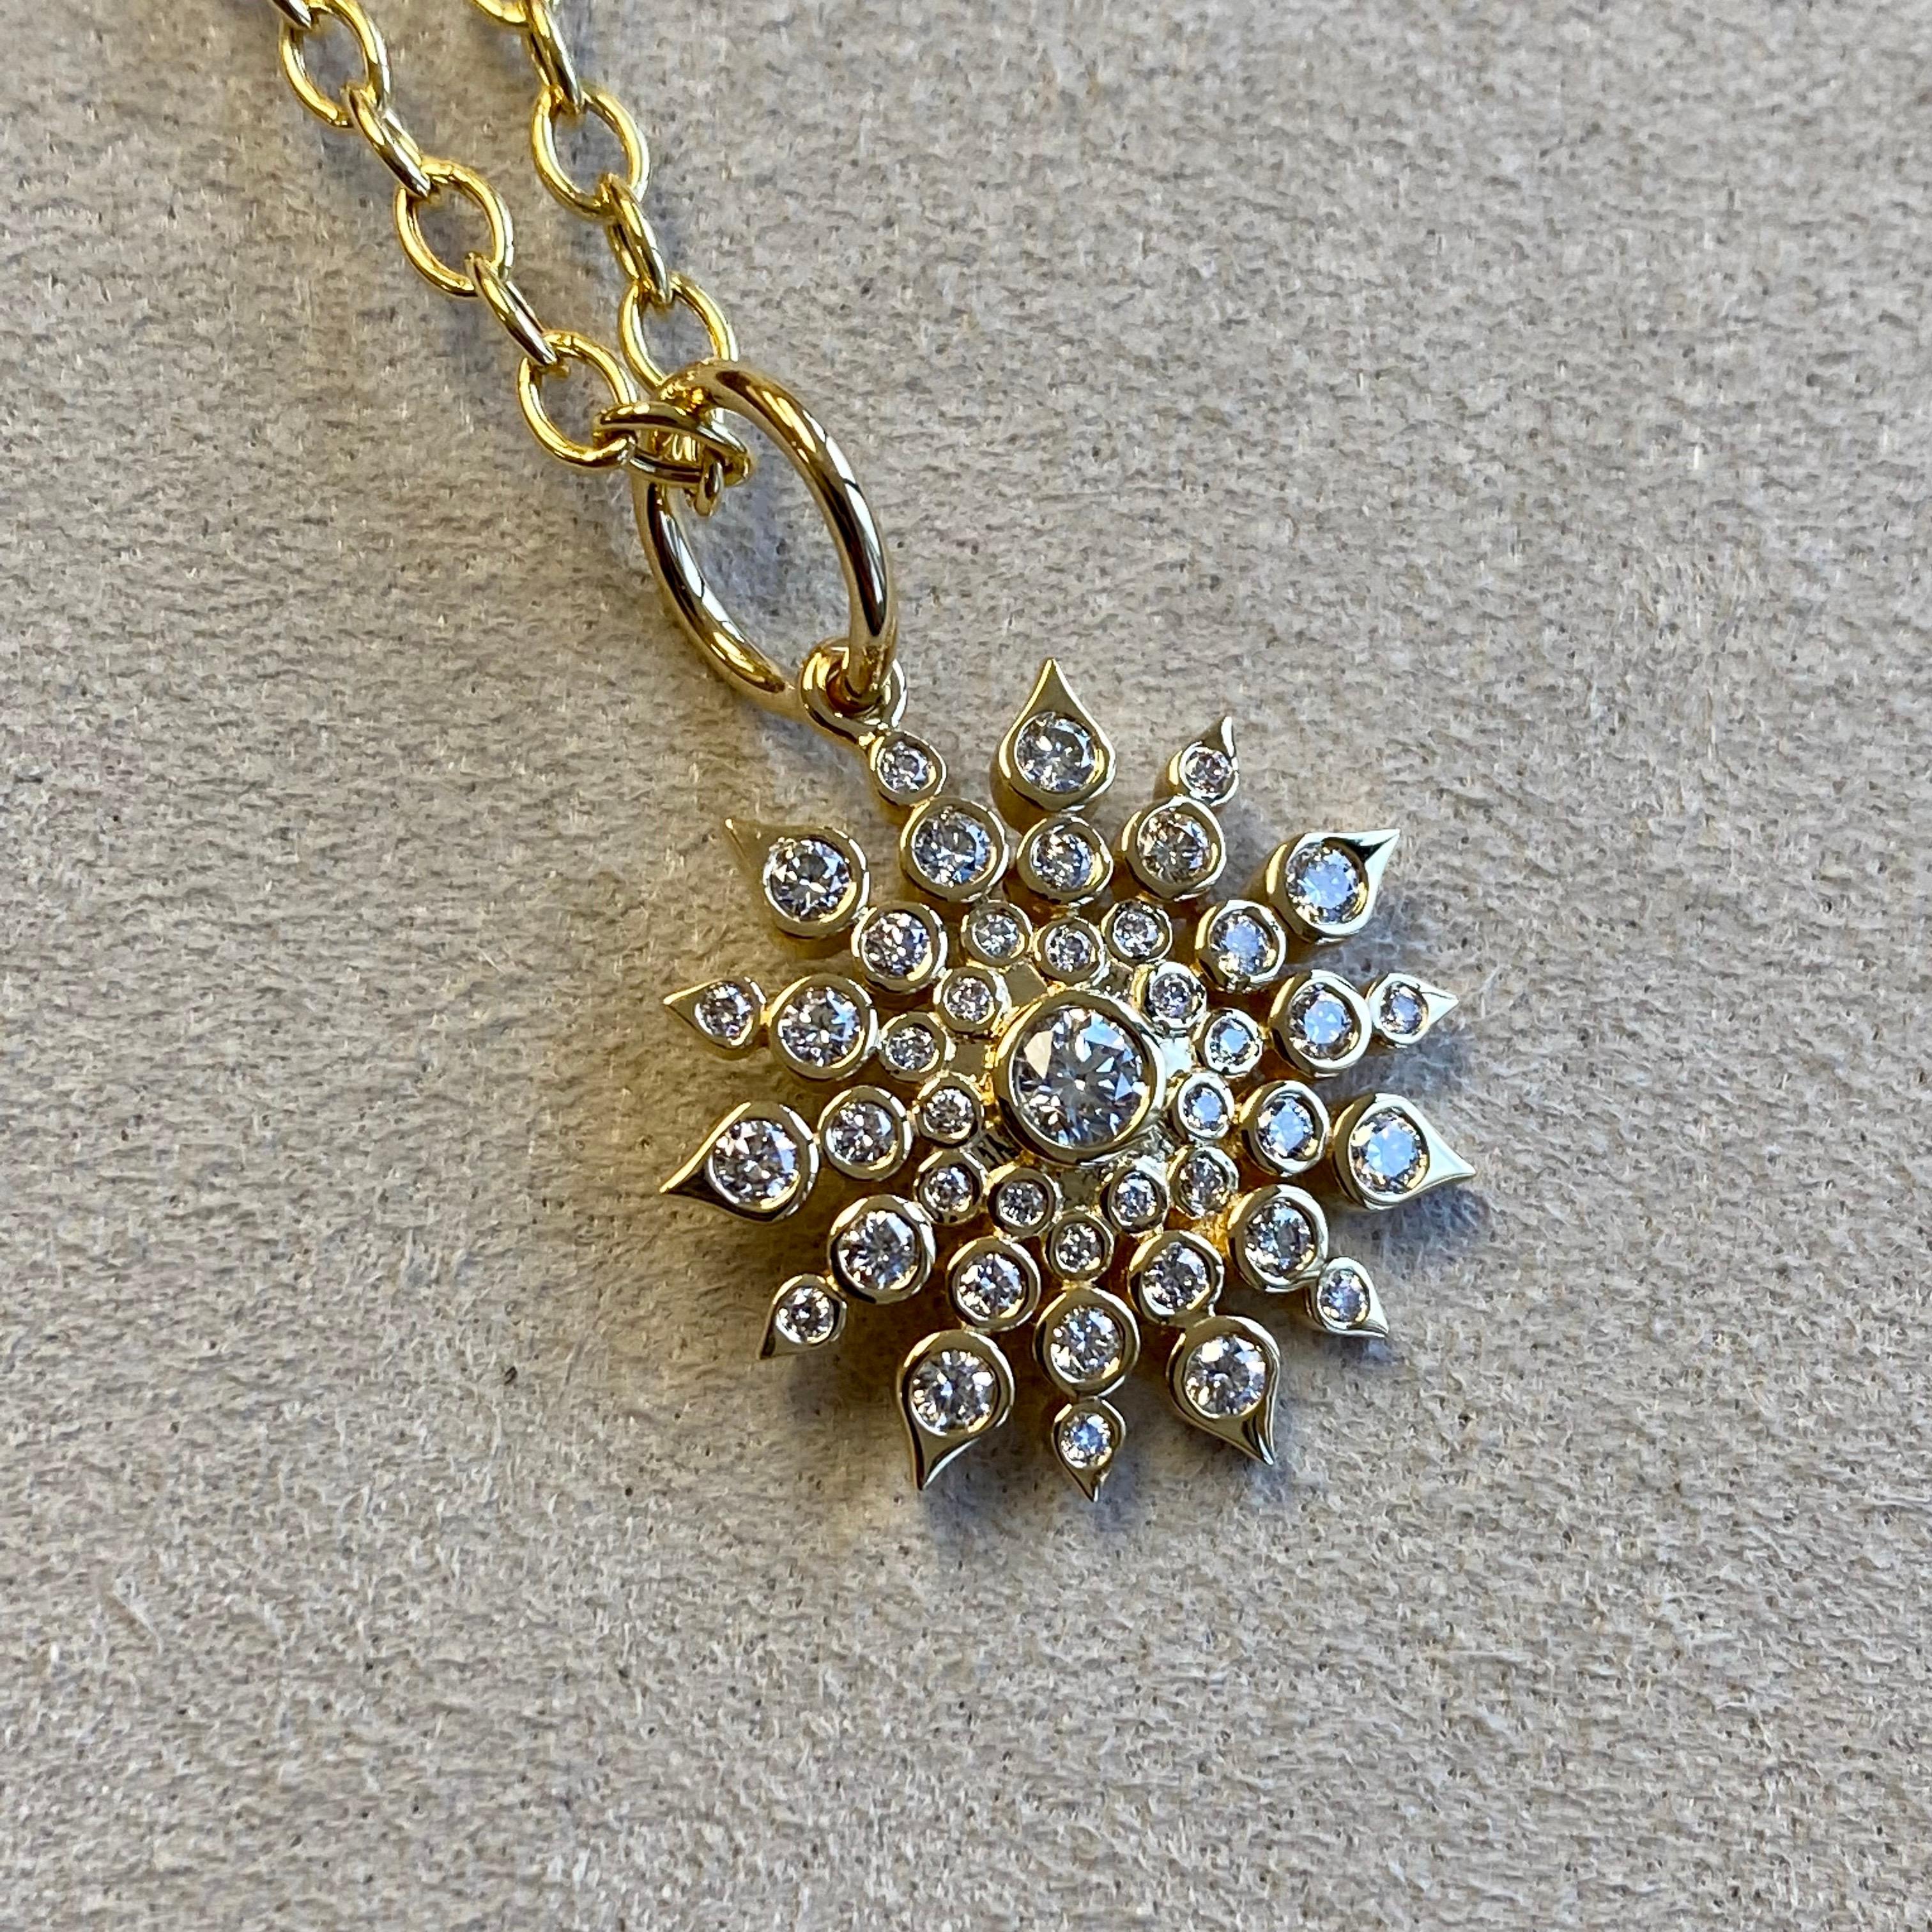 Created in 18kyg
Diamonds 0.60 carat approx.
Chain sold separately

Handcrafted in 18-karat yellow gold, this pendant is adorned with approximately 0.60 carats of diamonds, with the chain to be sold separately.

About the Designers ~ Dharmesh &